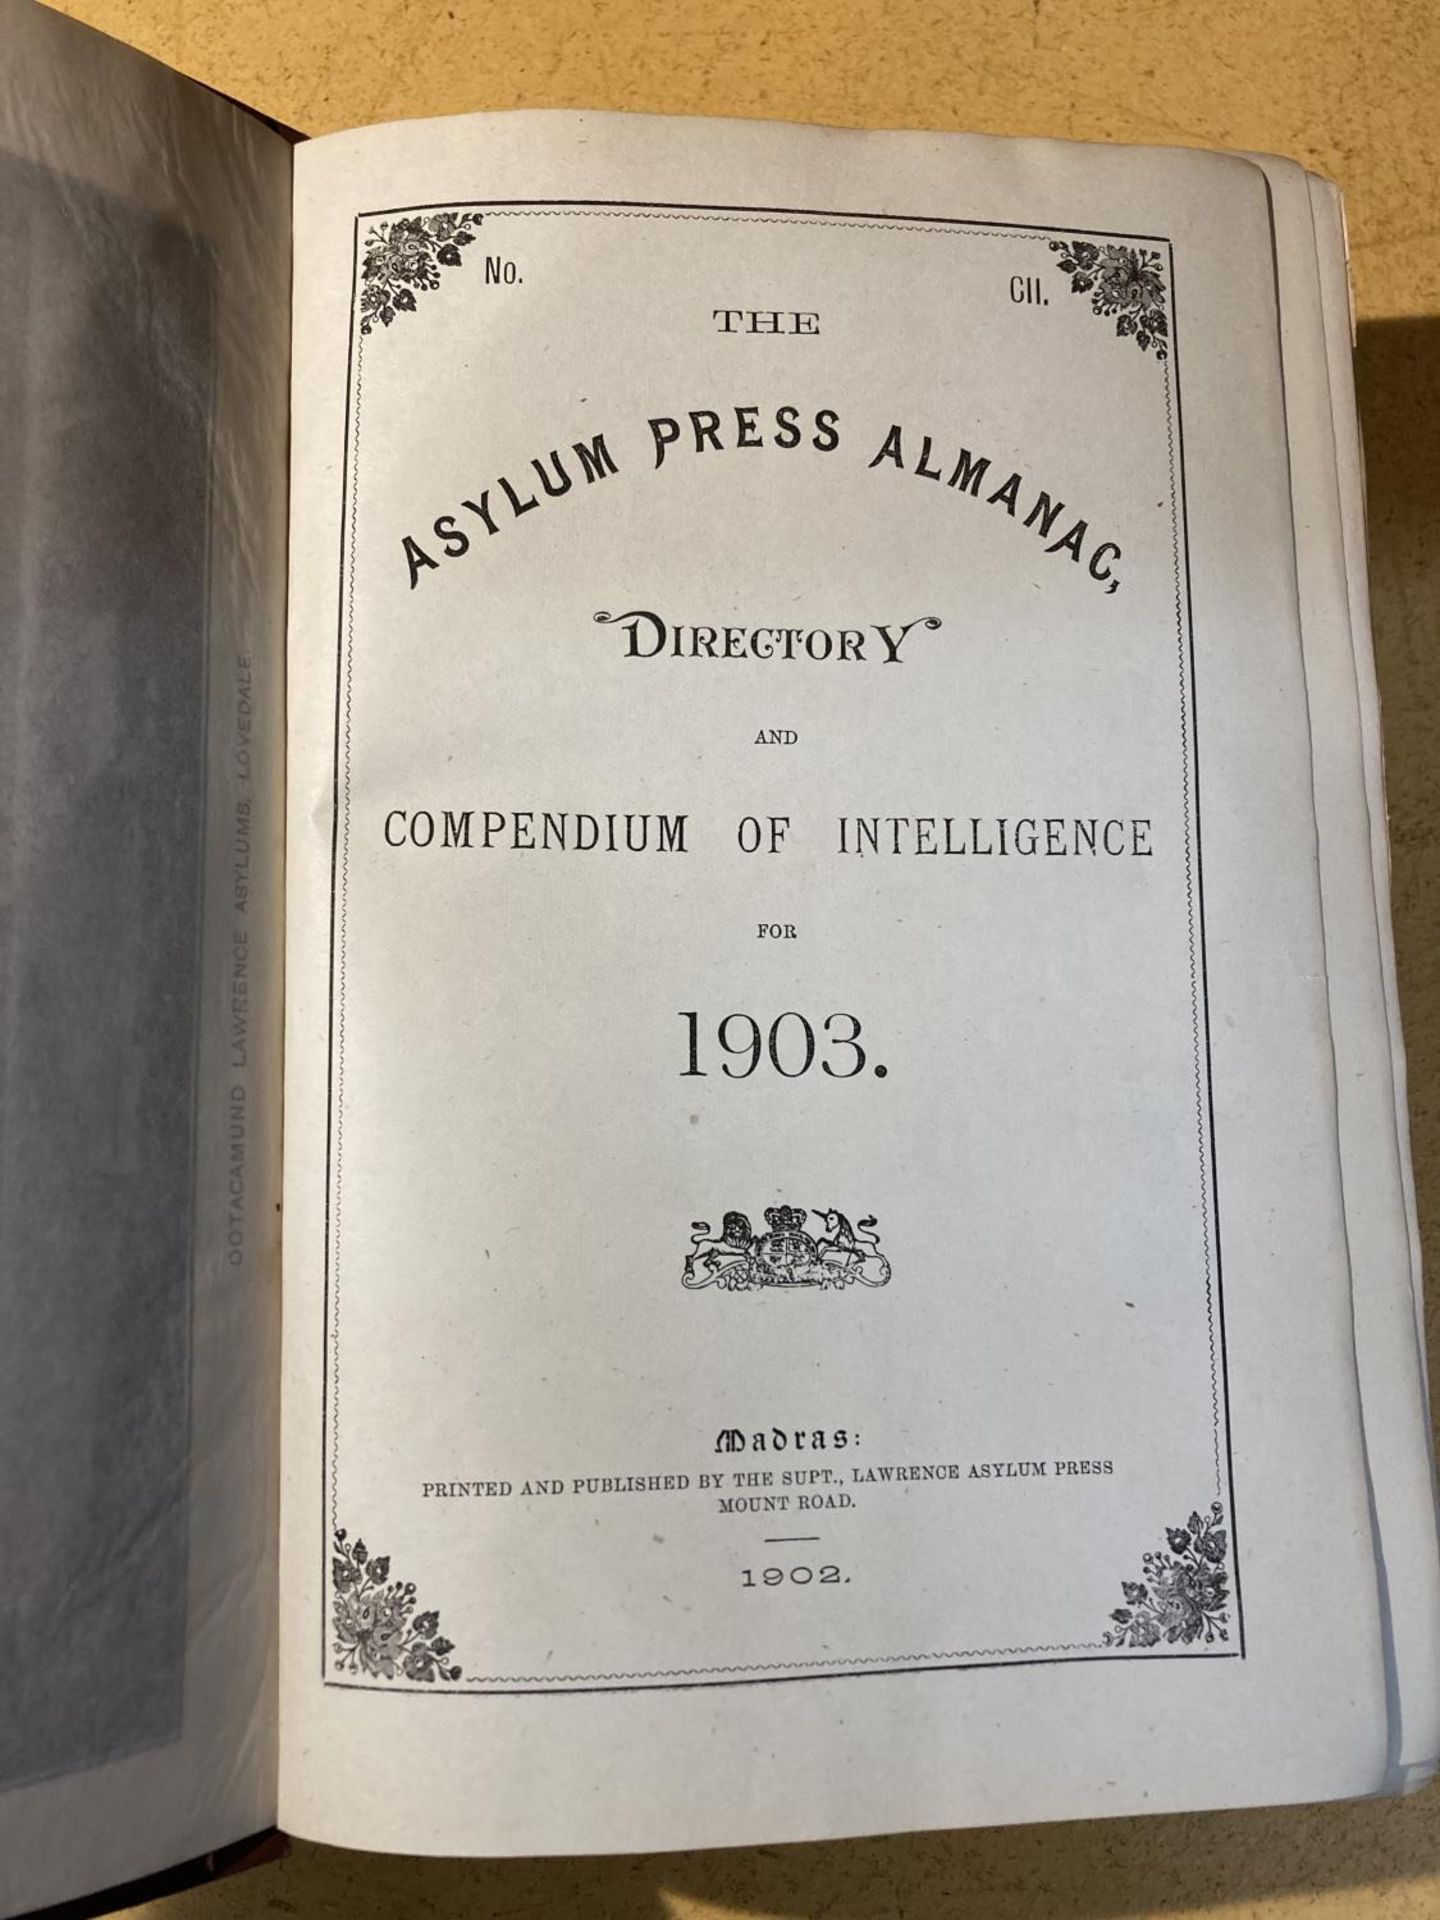 THE ASYLUM PRESS ALMANAC "DIRECTORY" AND COMPENDIUM OF INTELLIGENCE FOR 1903 PUBLISHED BY MADRAS - Image 4 of 4